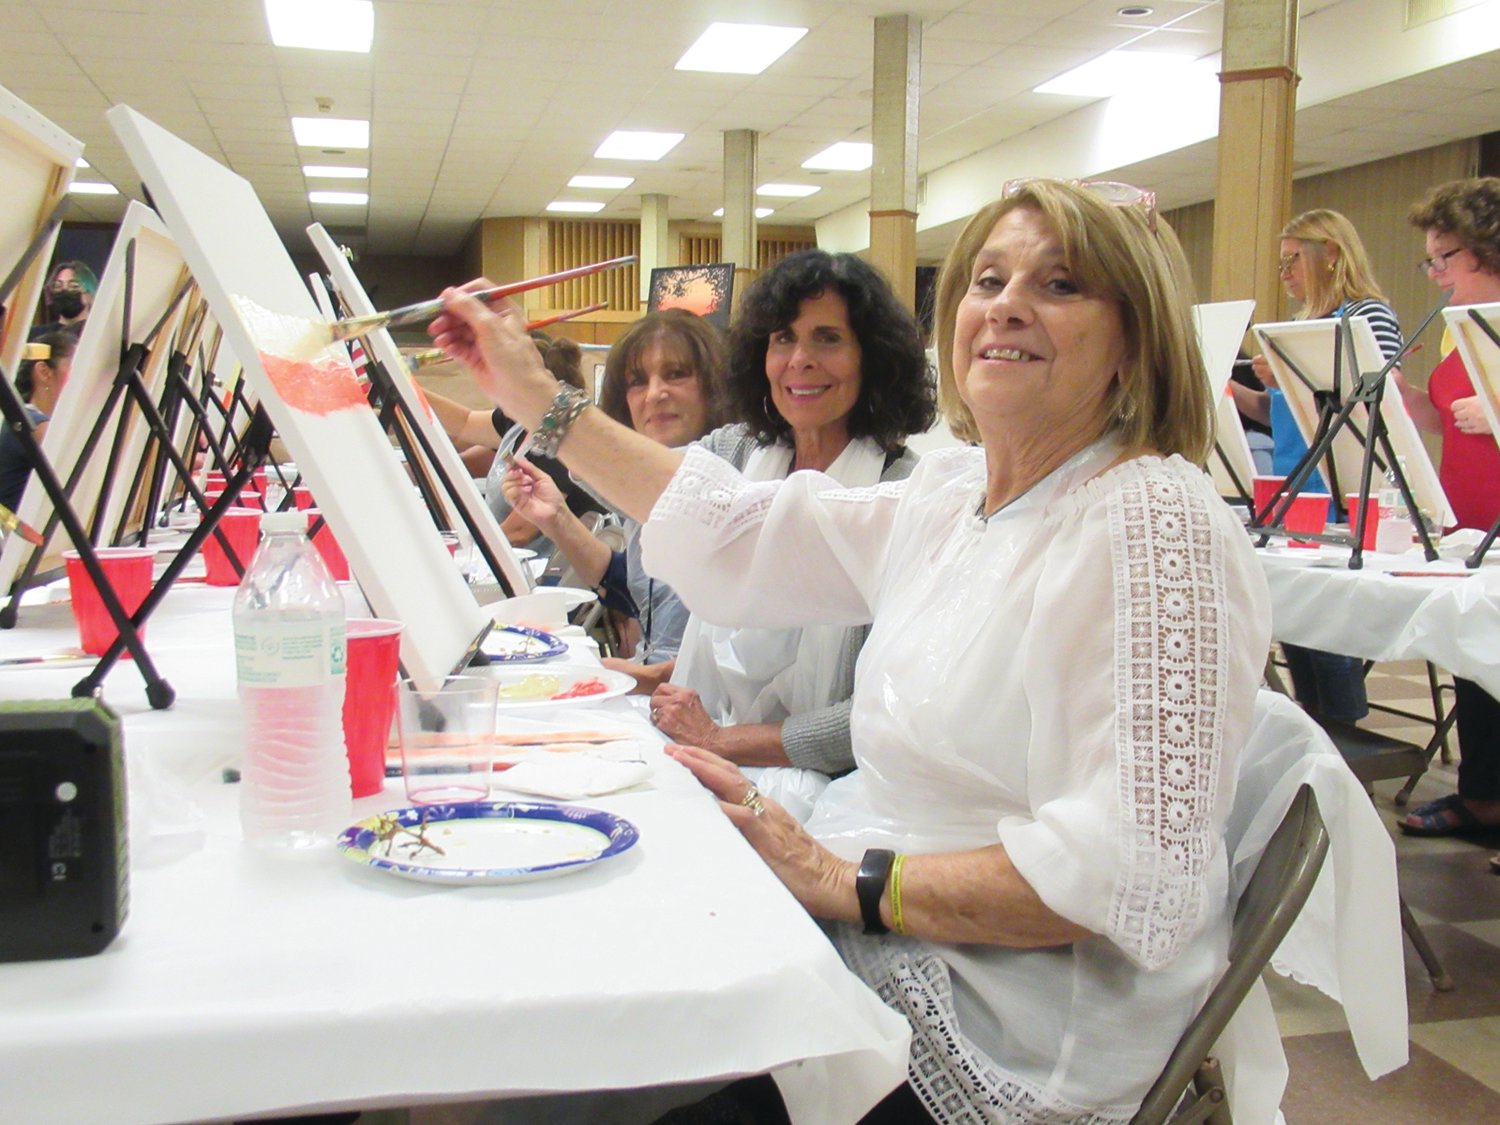 CANVAS CLUB: Cheryl Goneconte, Maria Mancini and Giovanna Venditelli show off their painting prowess while working a special sky and sunset scene during the Pannese Society’s recent fun-filled event inside OLG’s Fioretti Hall.